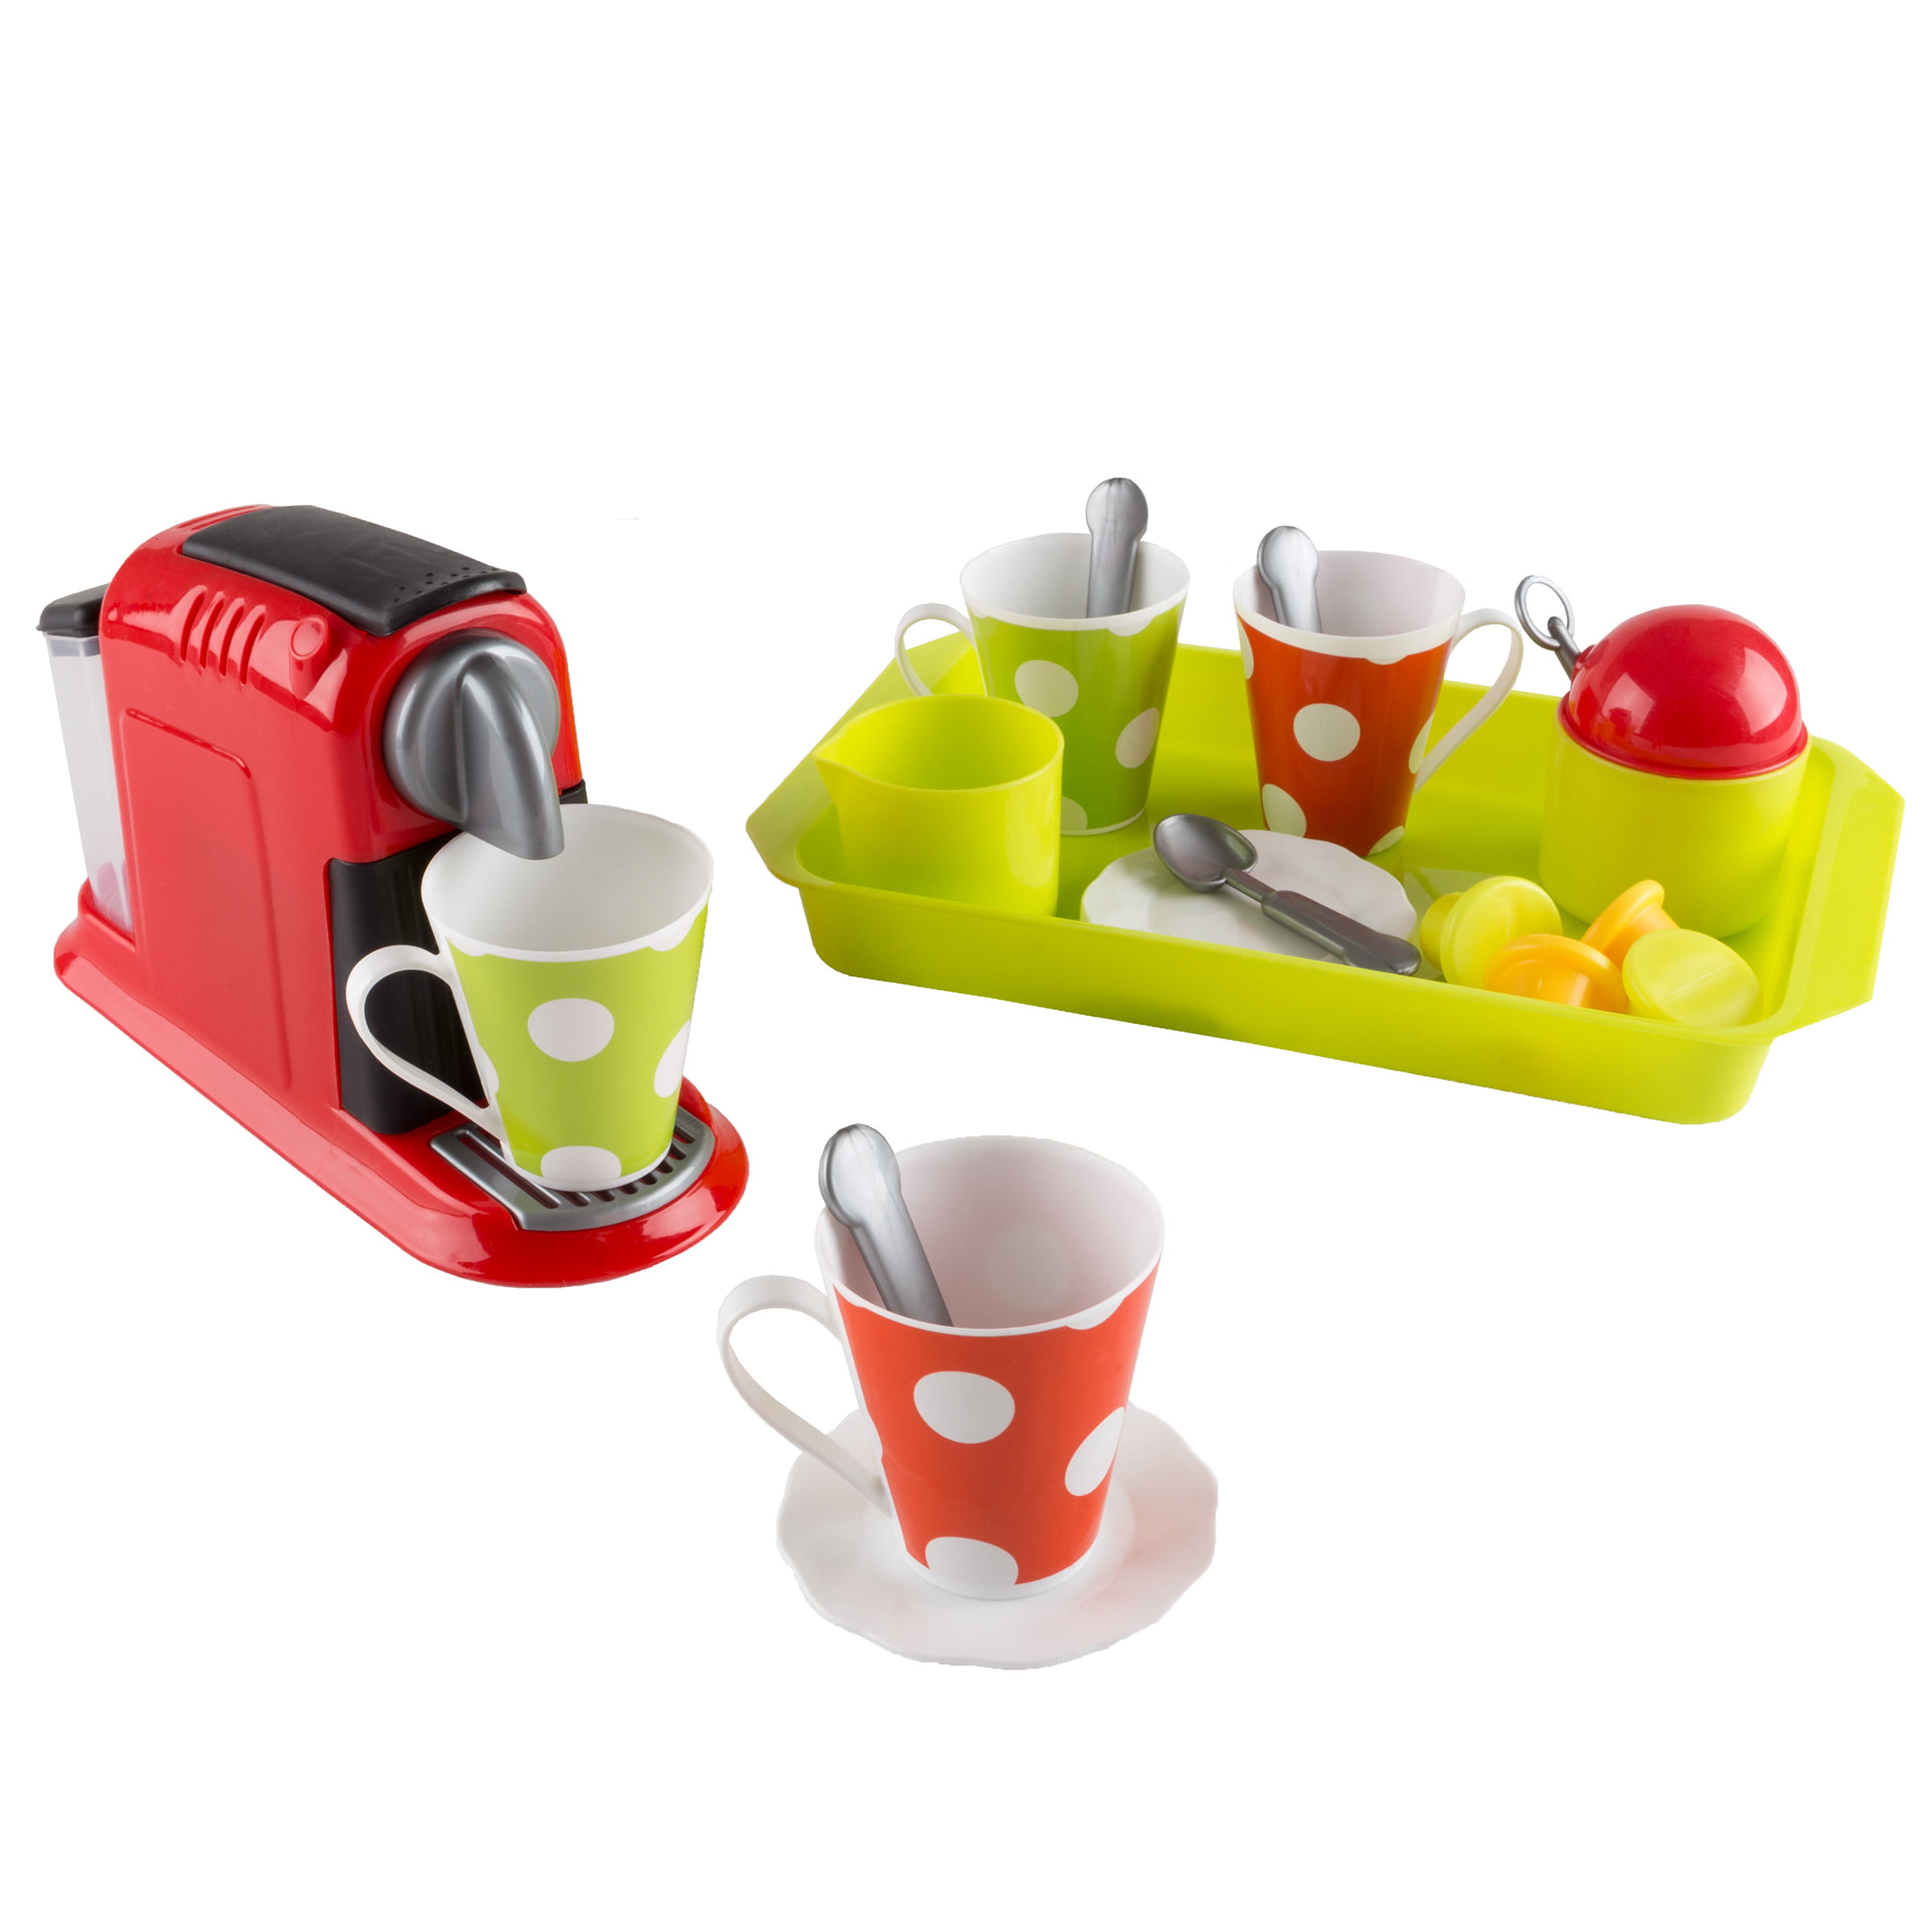 Coffee Maker Toy Set- Pretend Kitchen Appliance by Hey! Play!